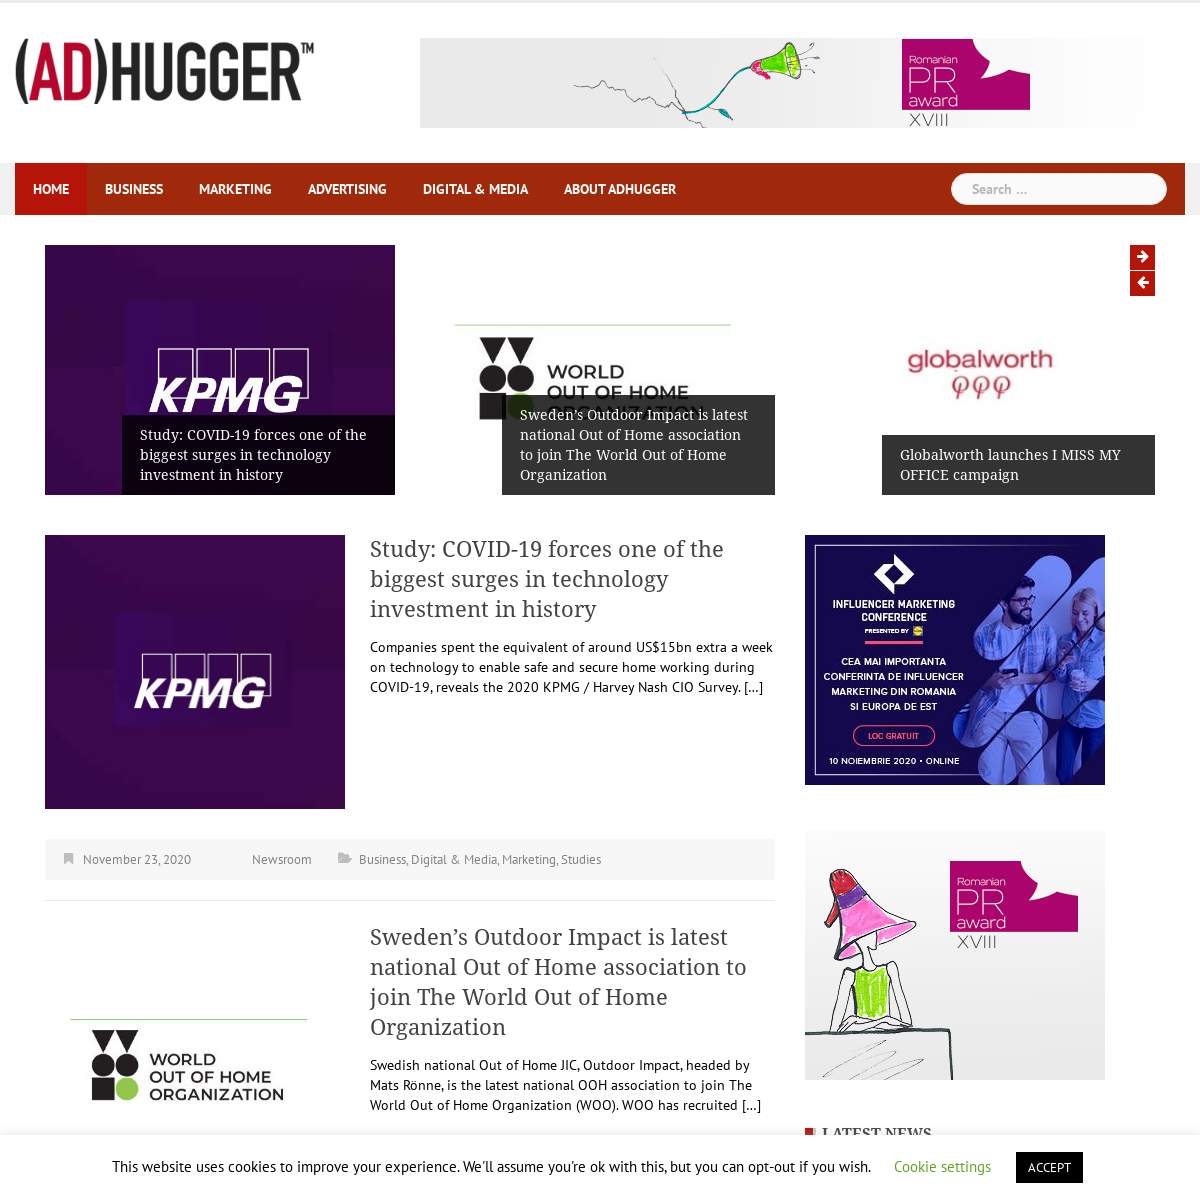 A complete backup of adhugger.net